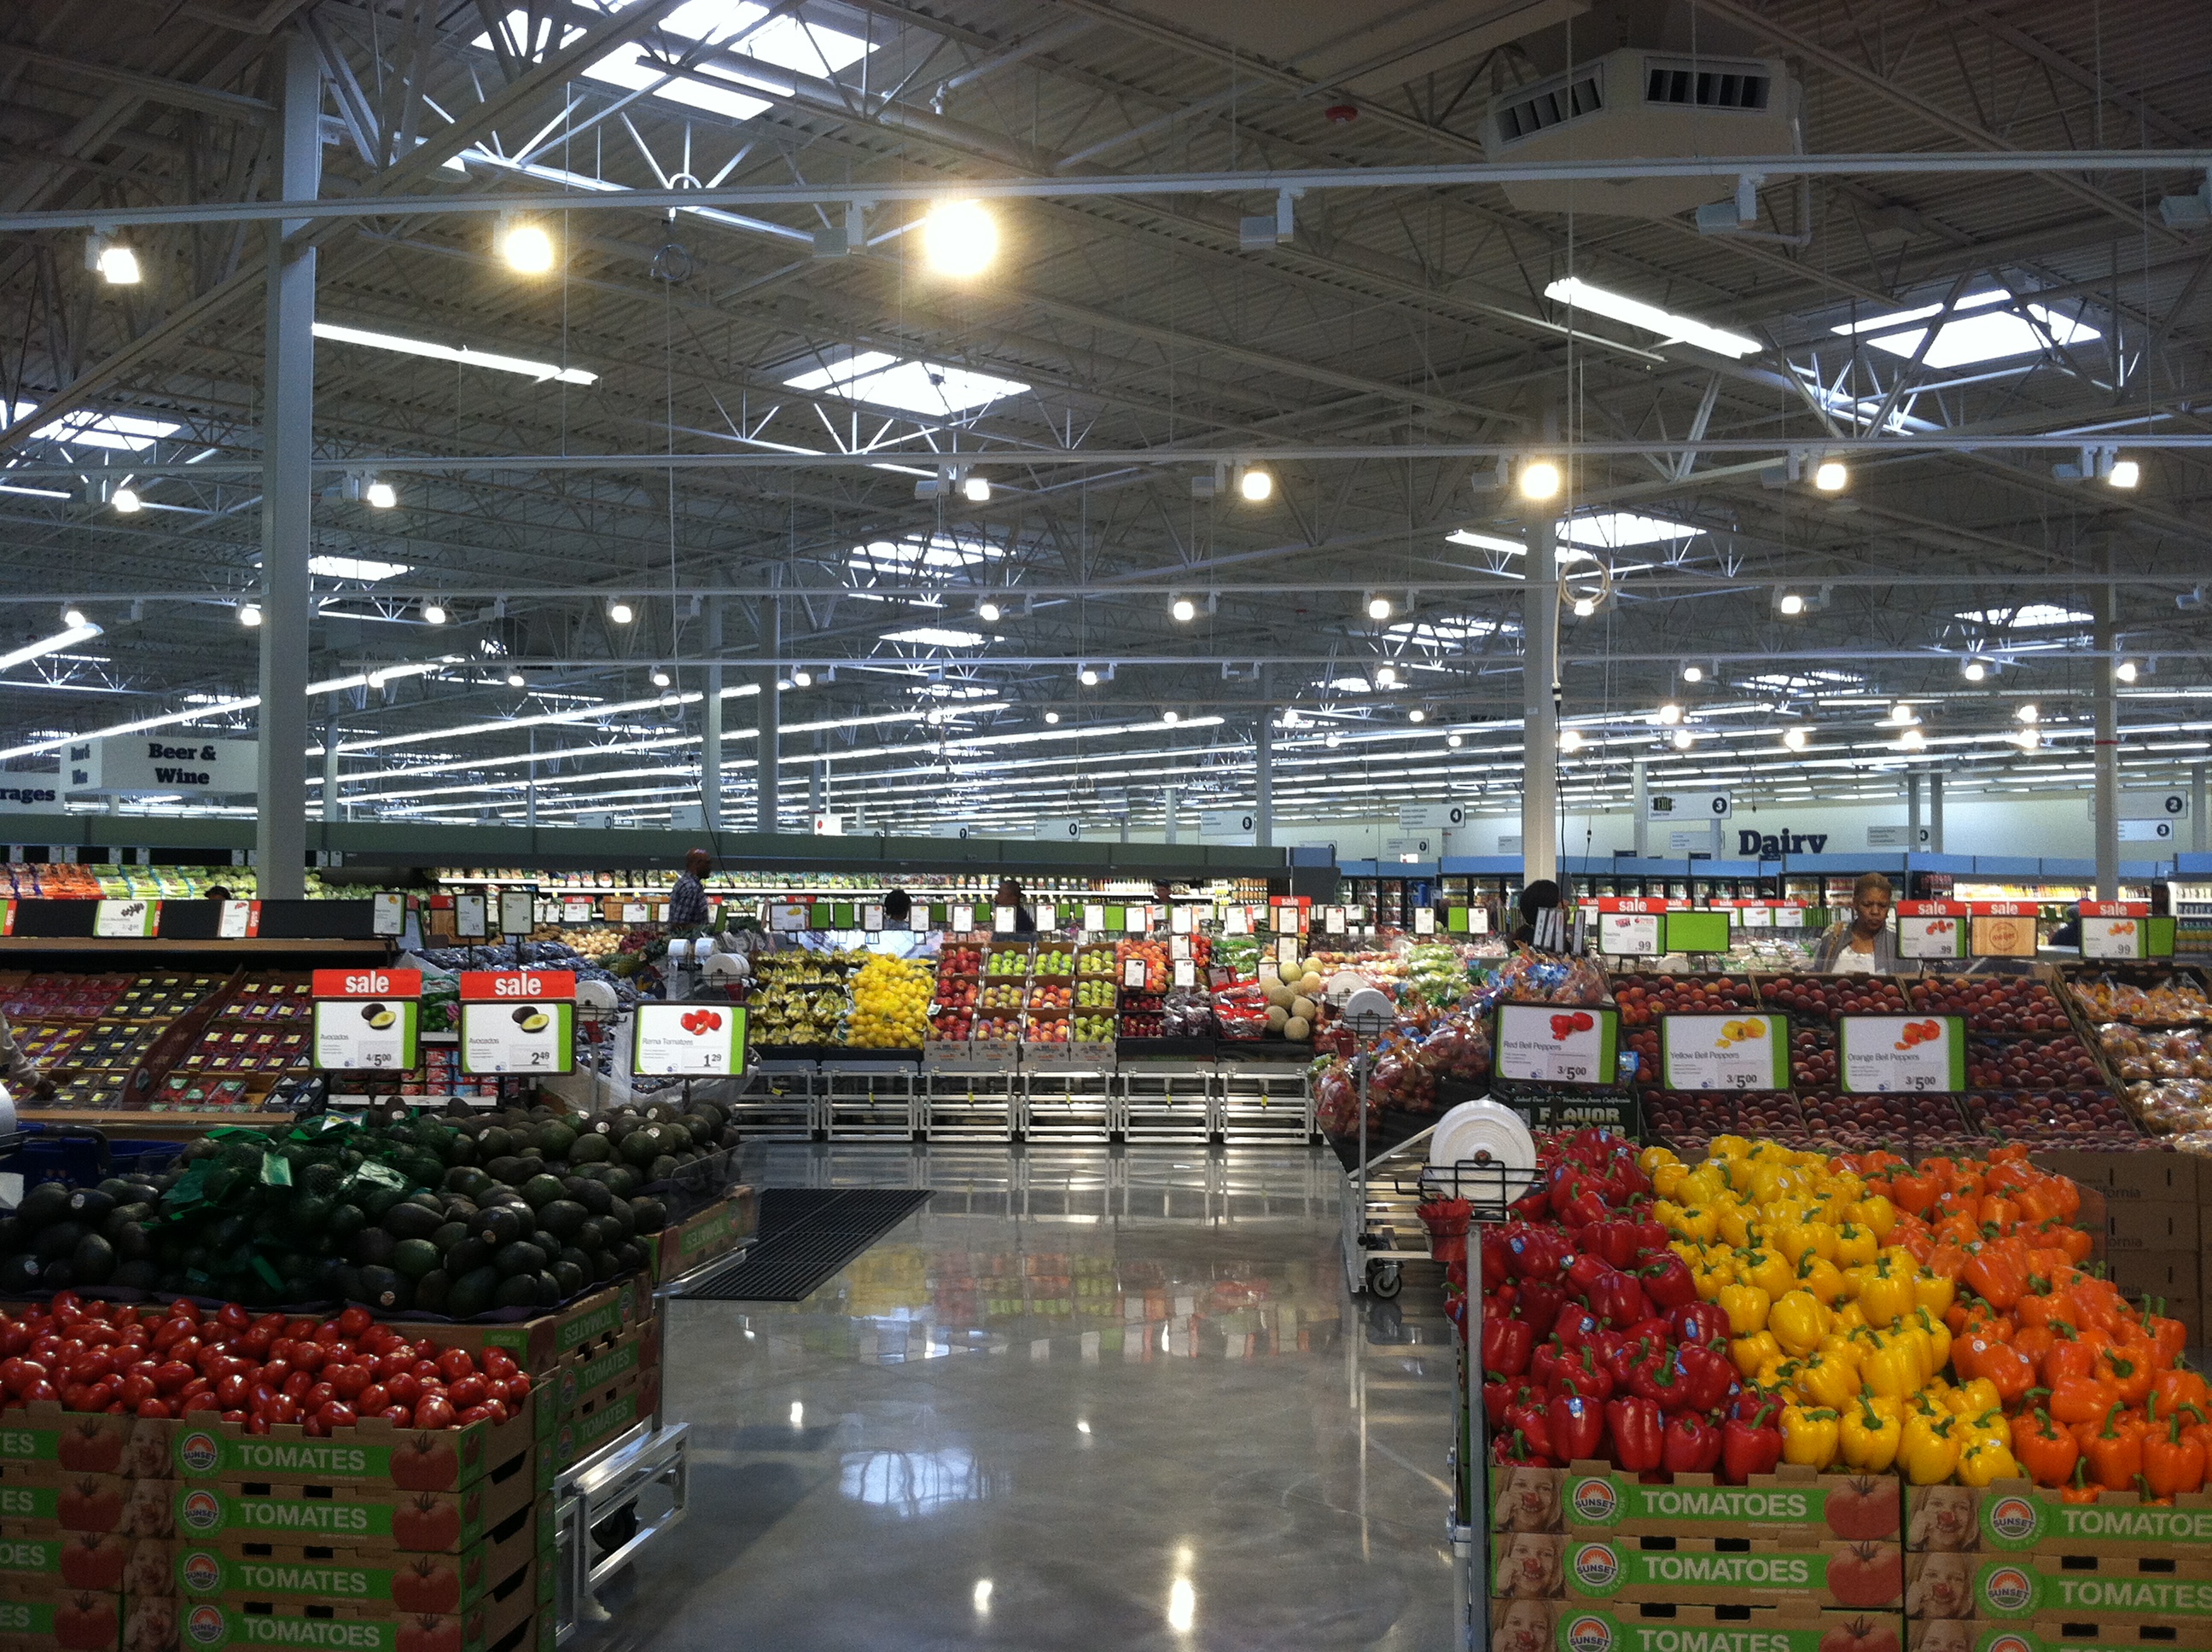 A grocery aisle filled with fruits and vegetables.